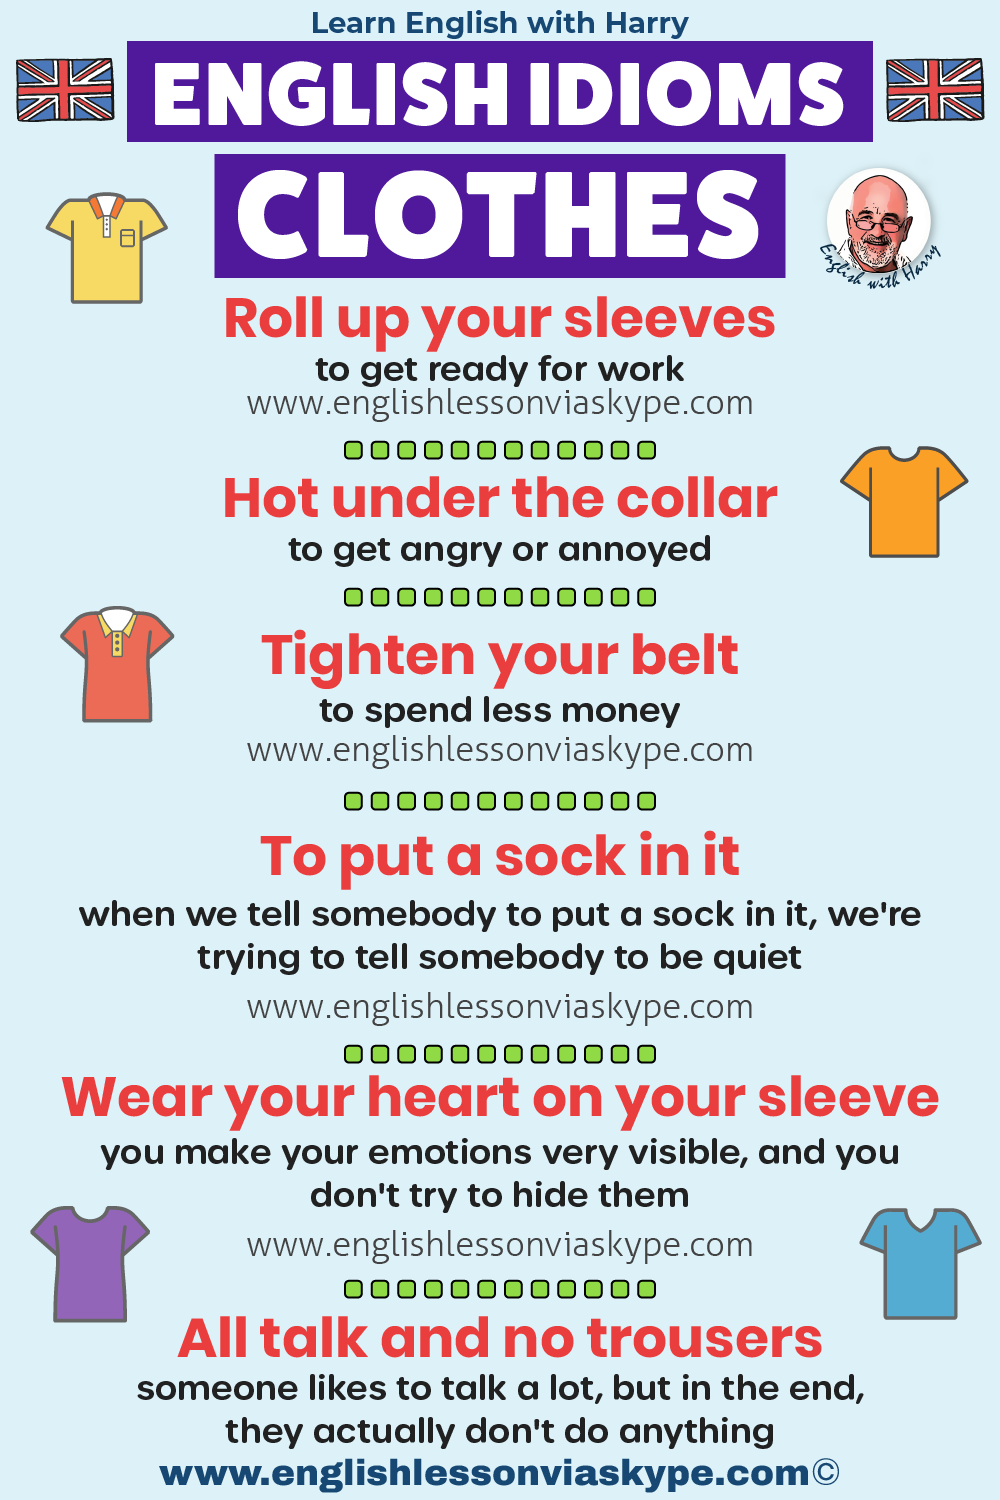 15 clothing and fashion idioms to make your writing more stylish - YP